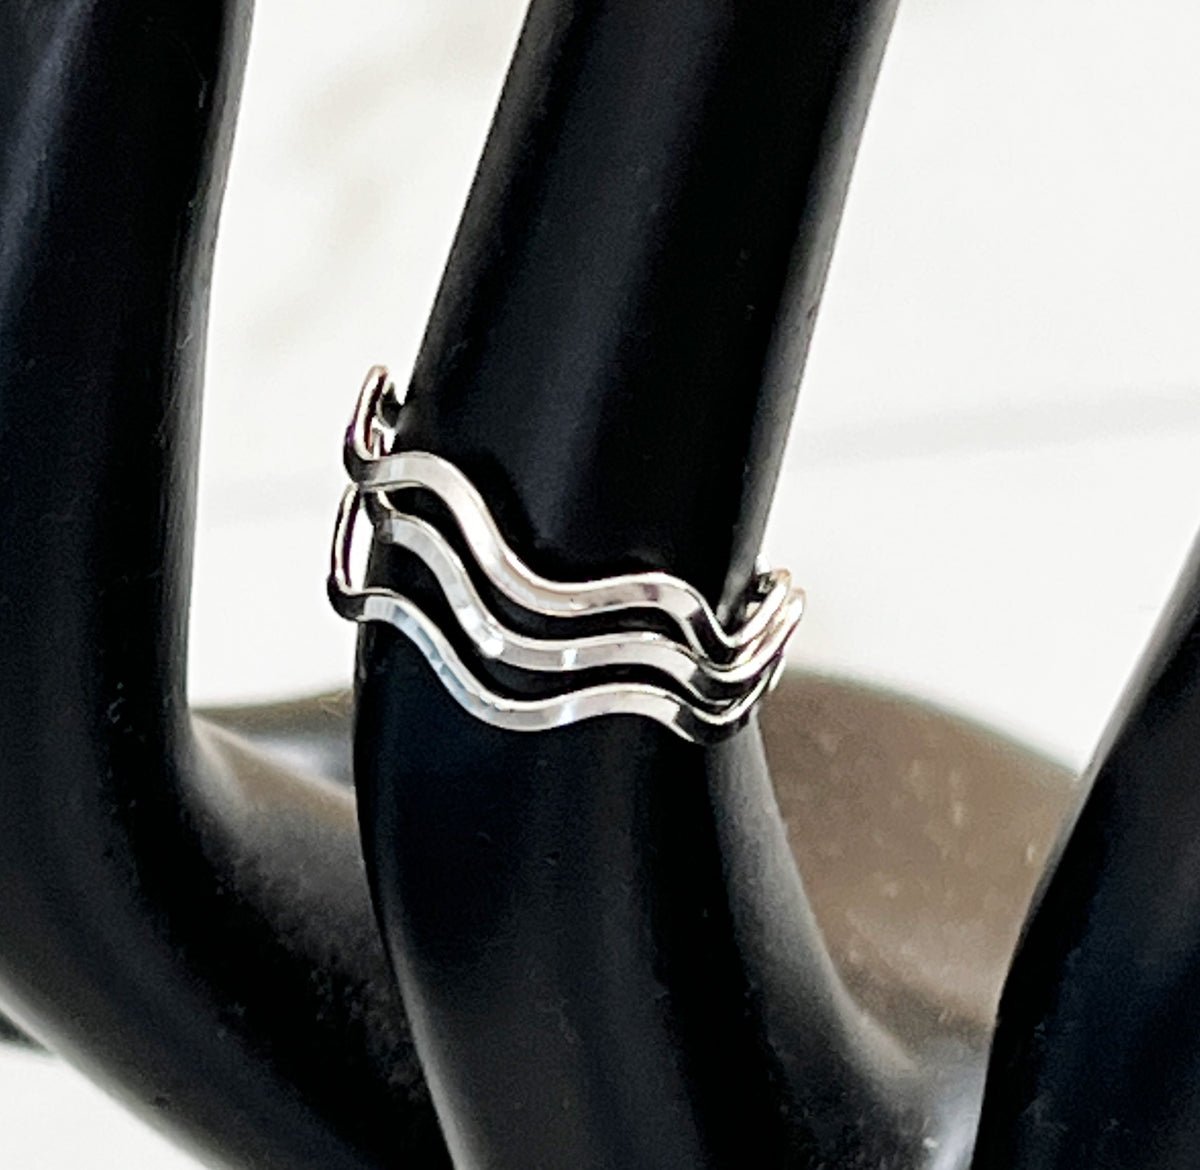 Free Wave Sterling Toe Ring